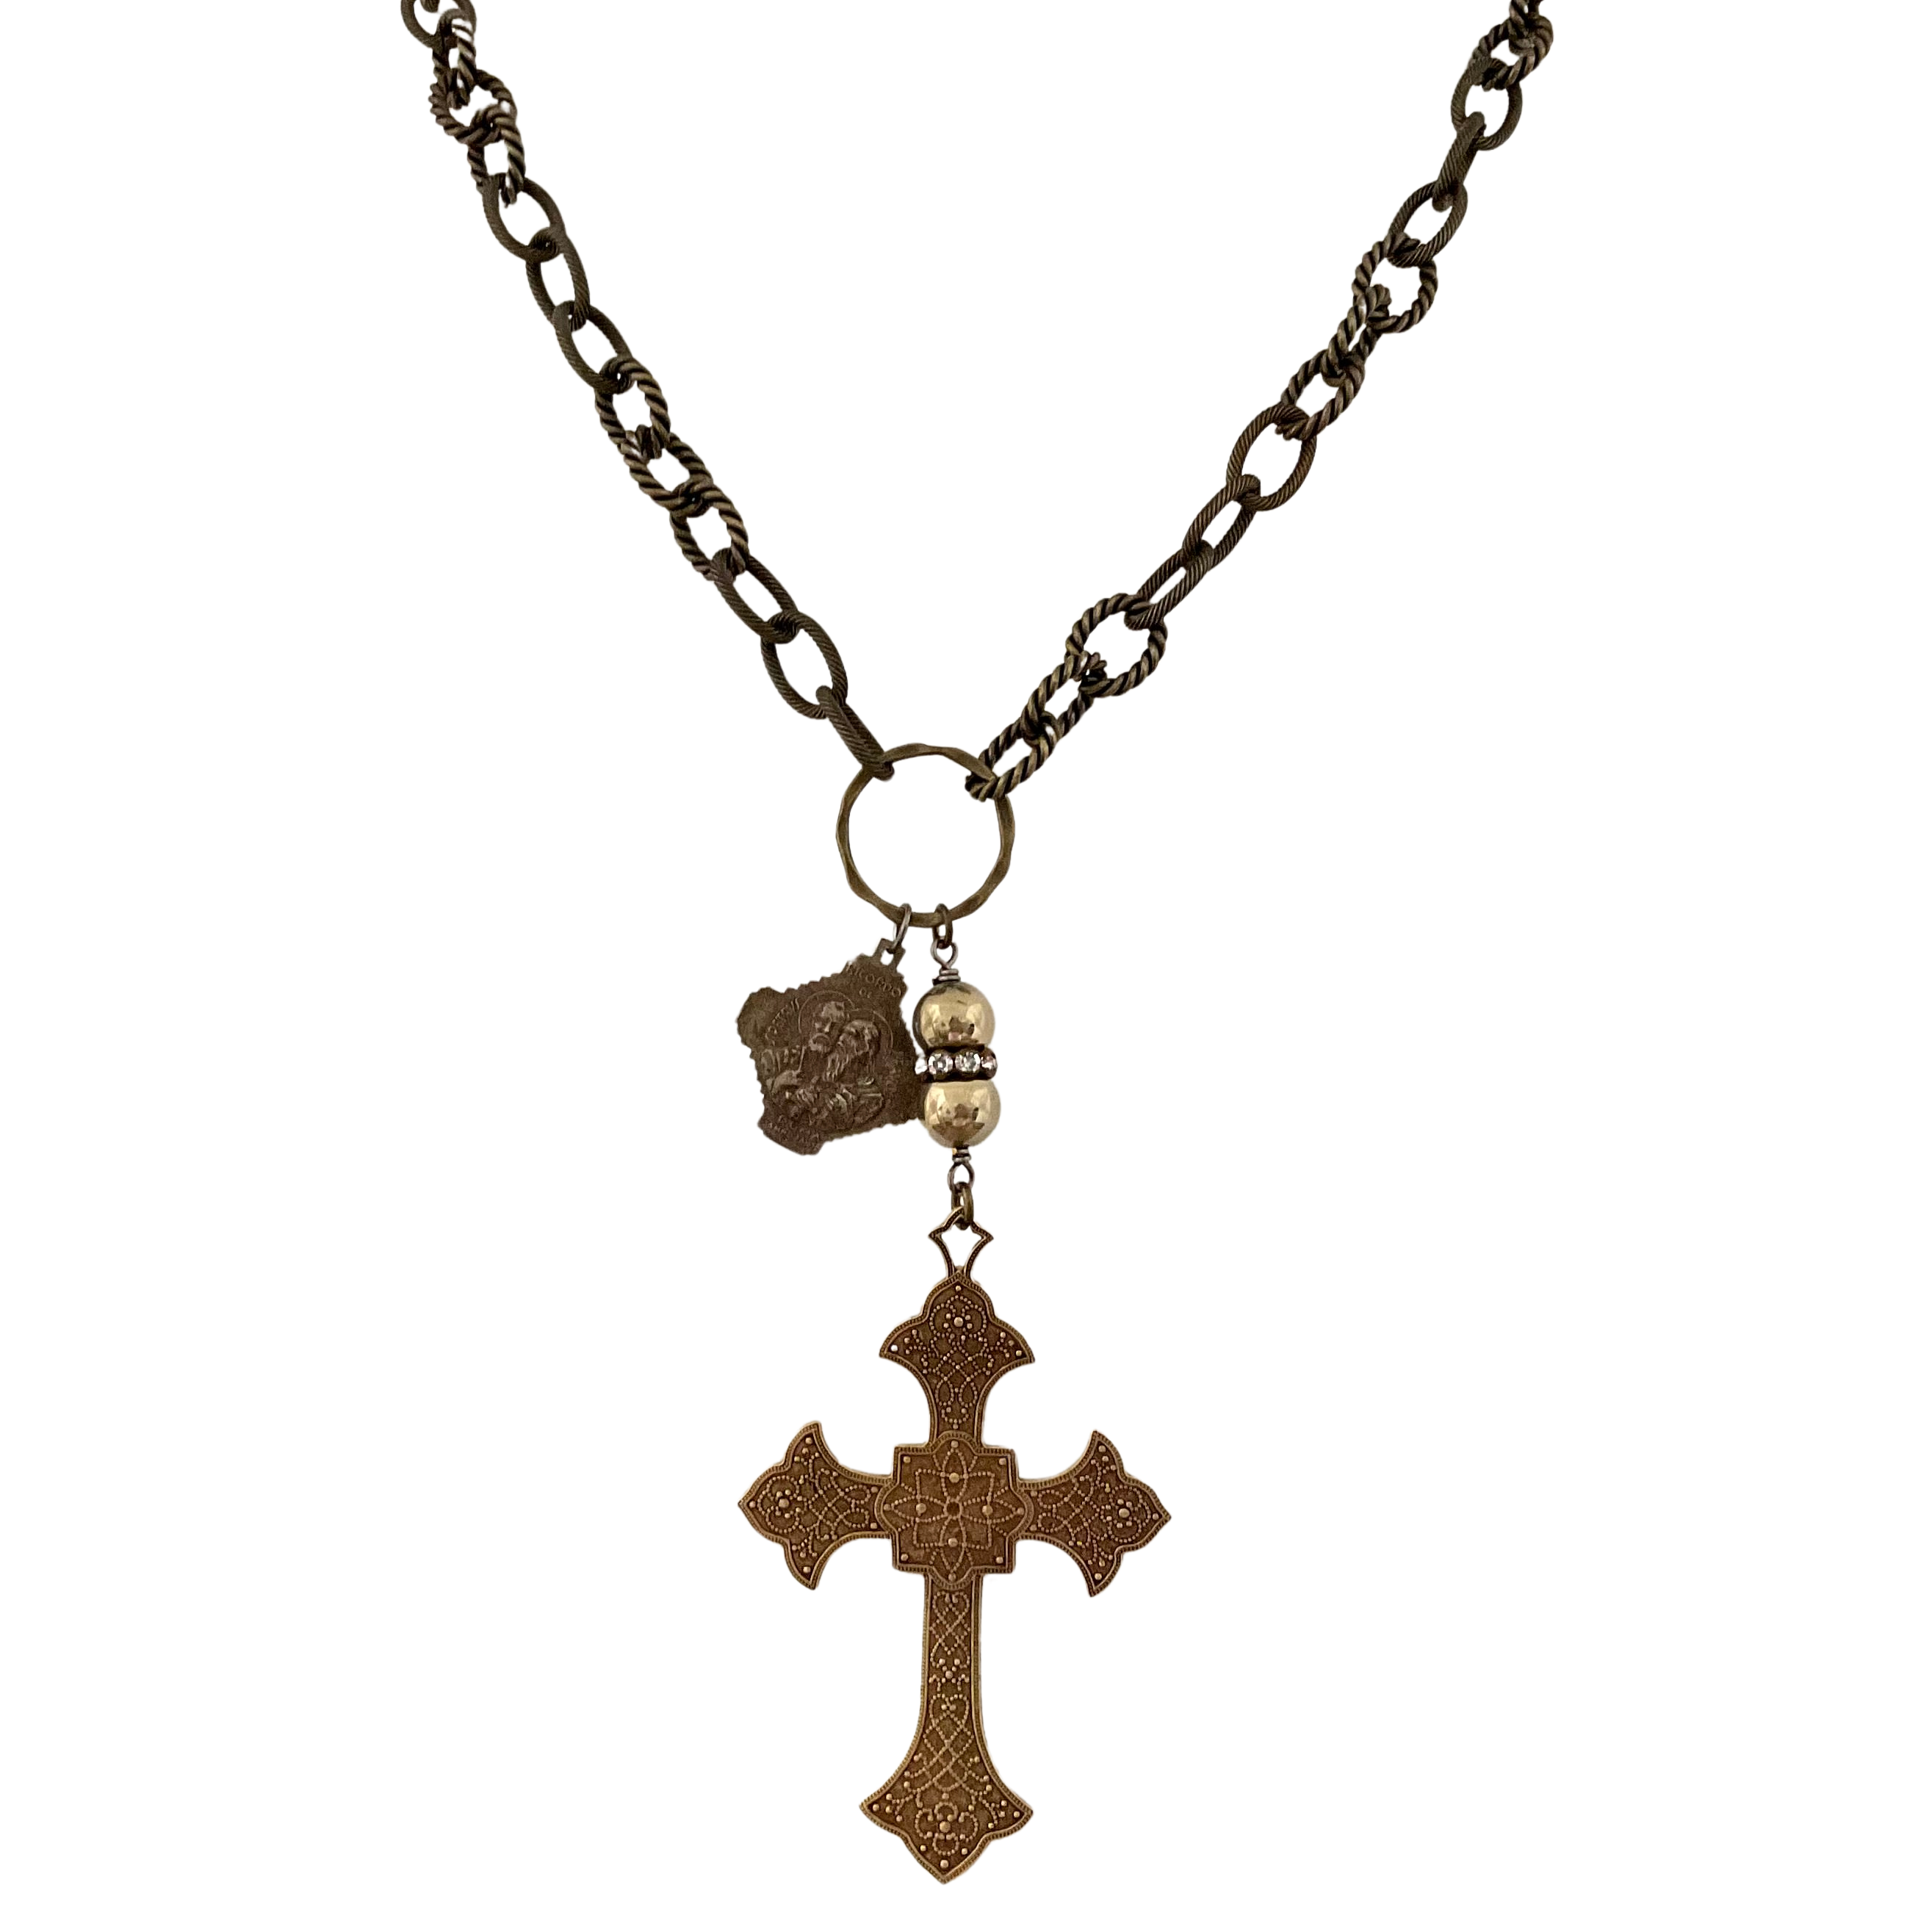 Antique Brass Chain with Religious Medallion & Reproduction Cross 34